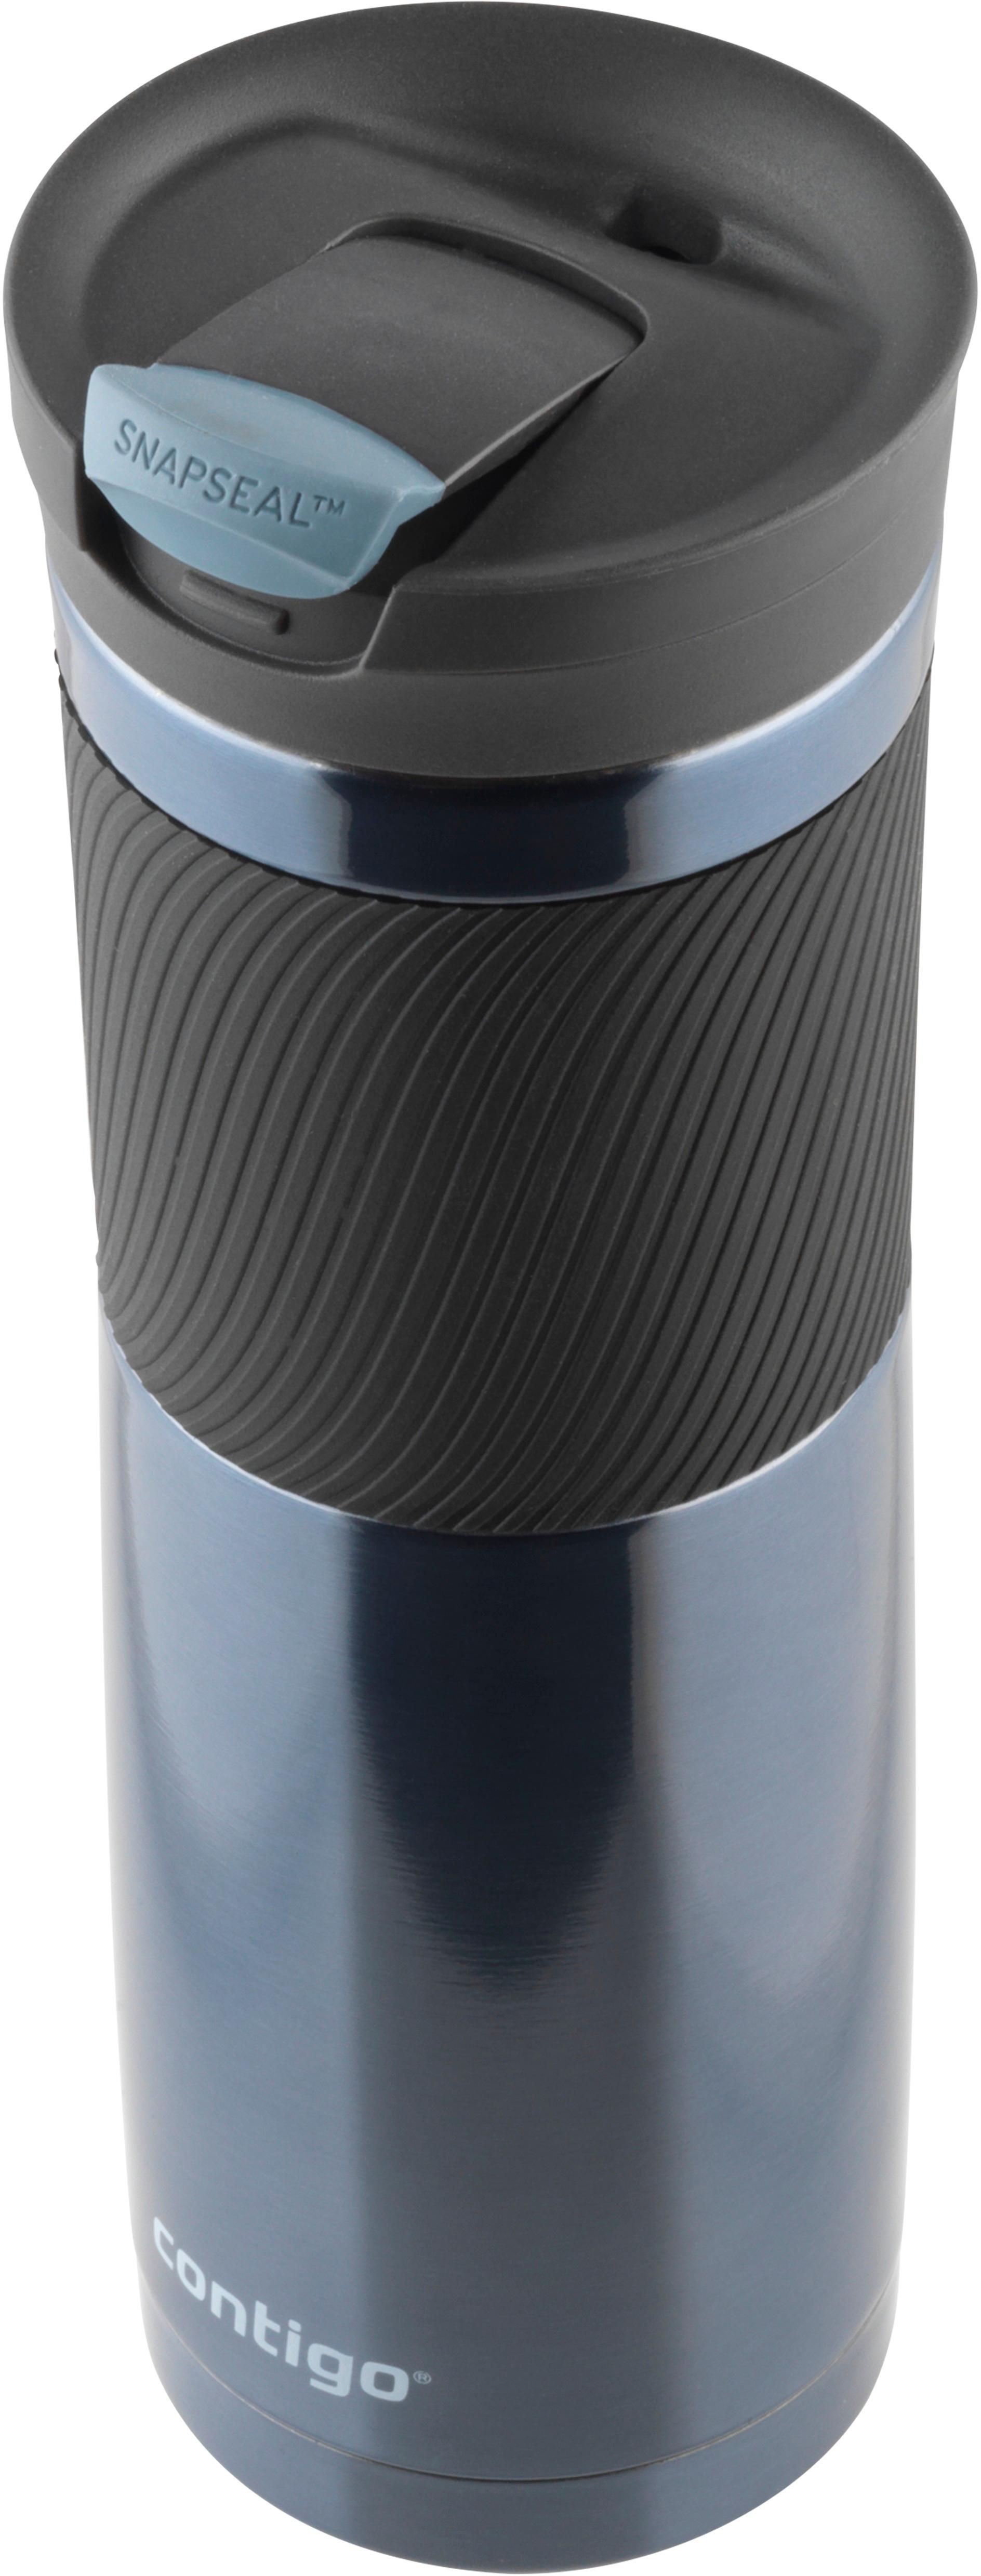 Byron Stainless Steel Travel Mug with SNAPSEAL™ Lid and Grip, 16